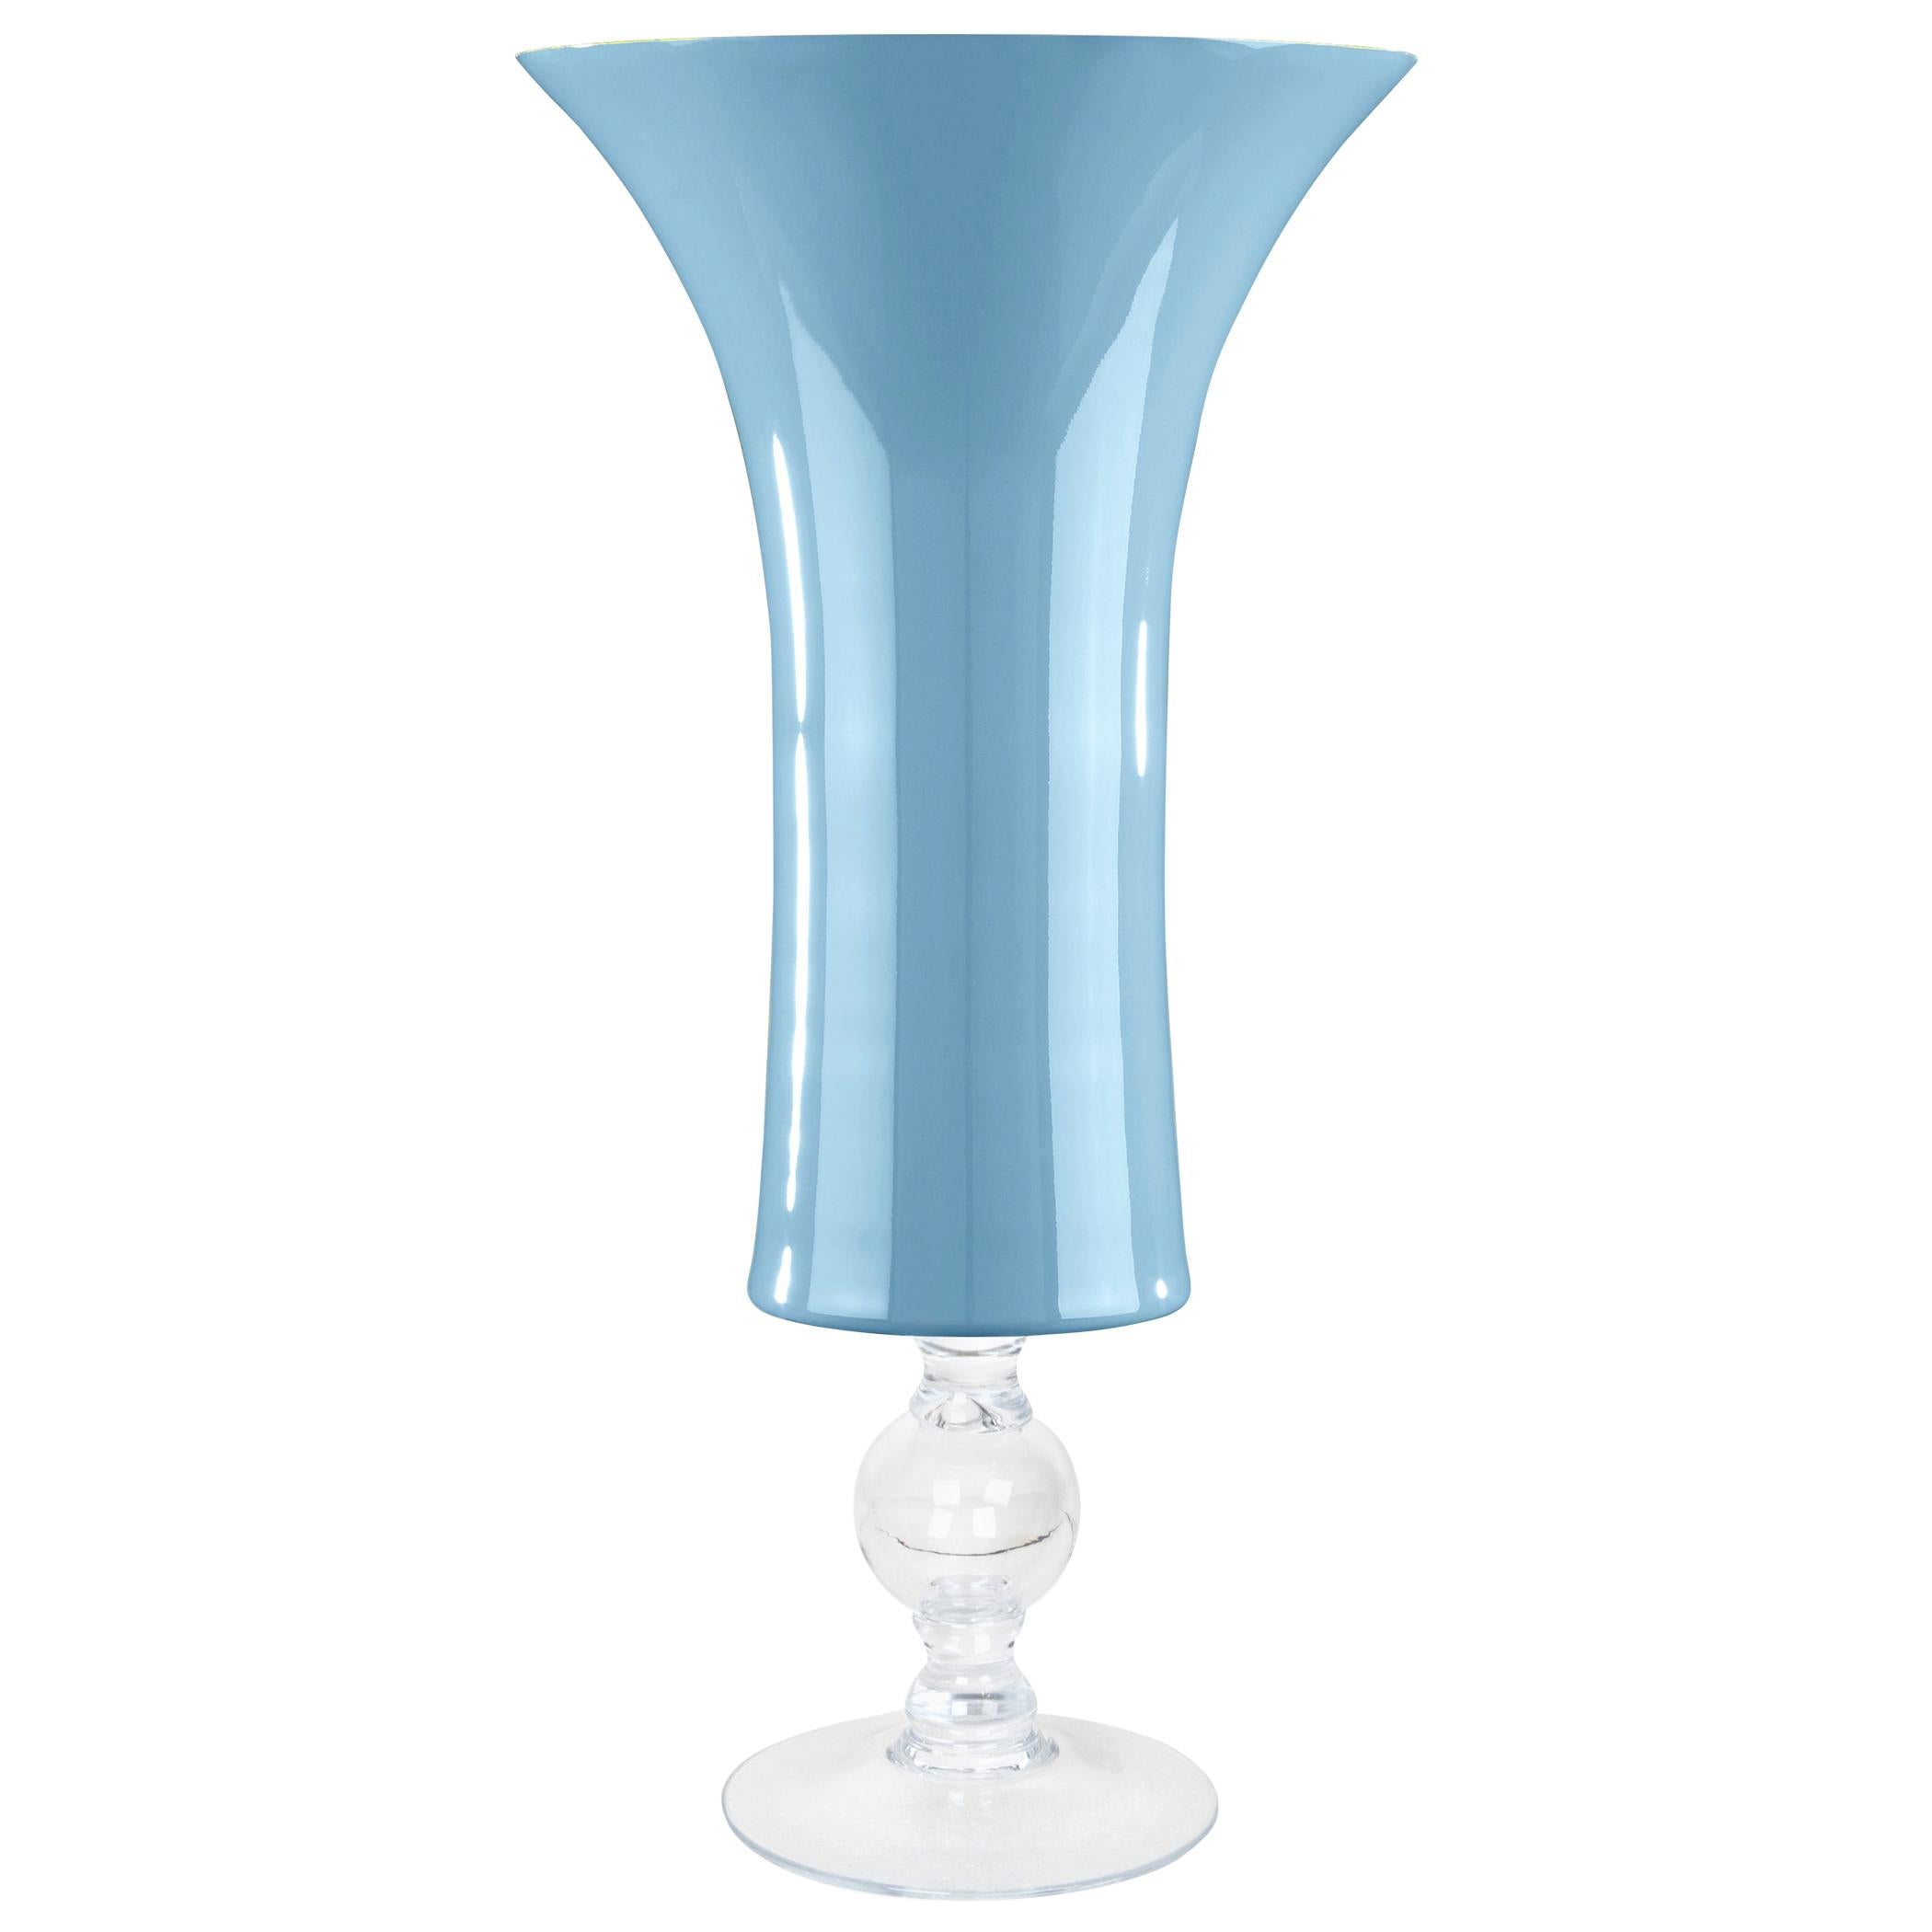 Bowl Laura Big, Purist Blue Color, 2020 Trend, in Glass, Italy For Sale